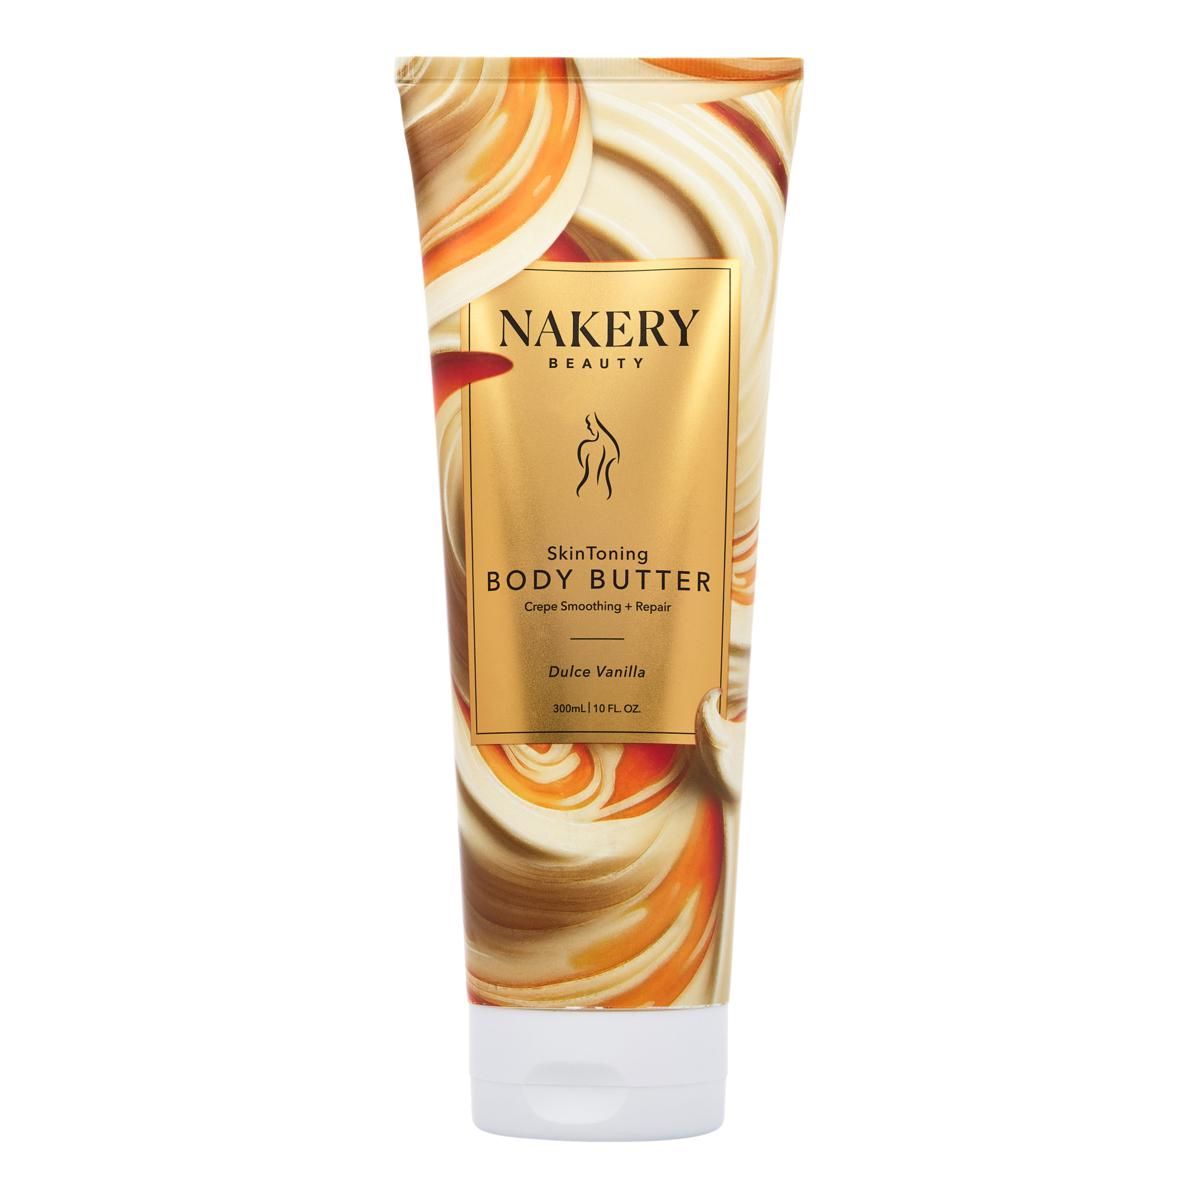 Nakery Beauty Dulce Vanilla Crepe Smoothing & Tightening Body Butter - 22387908 | HSN | HSN